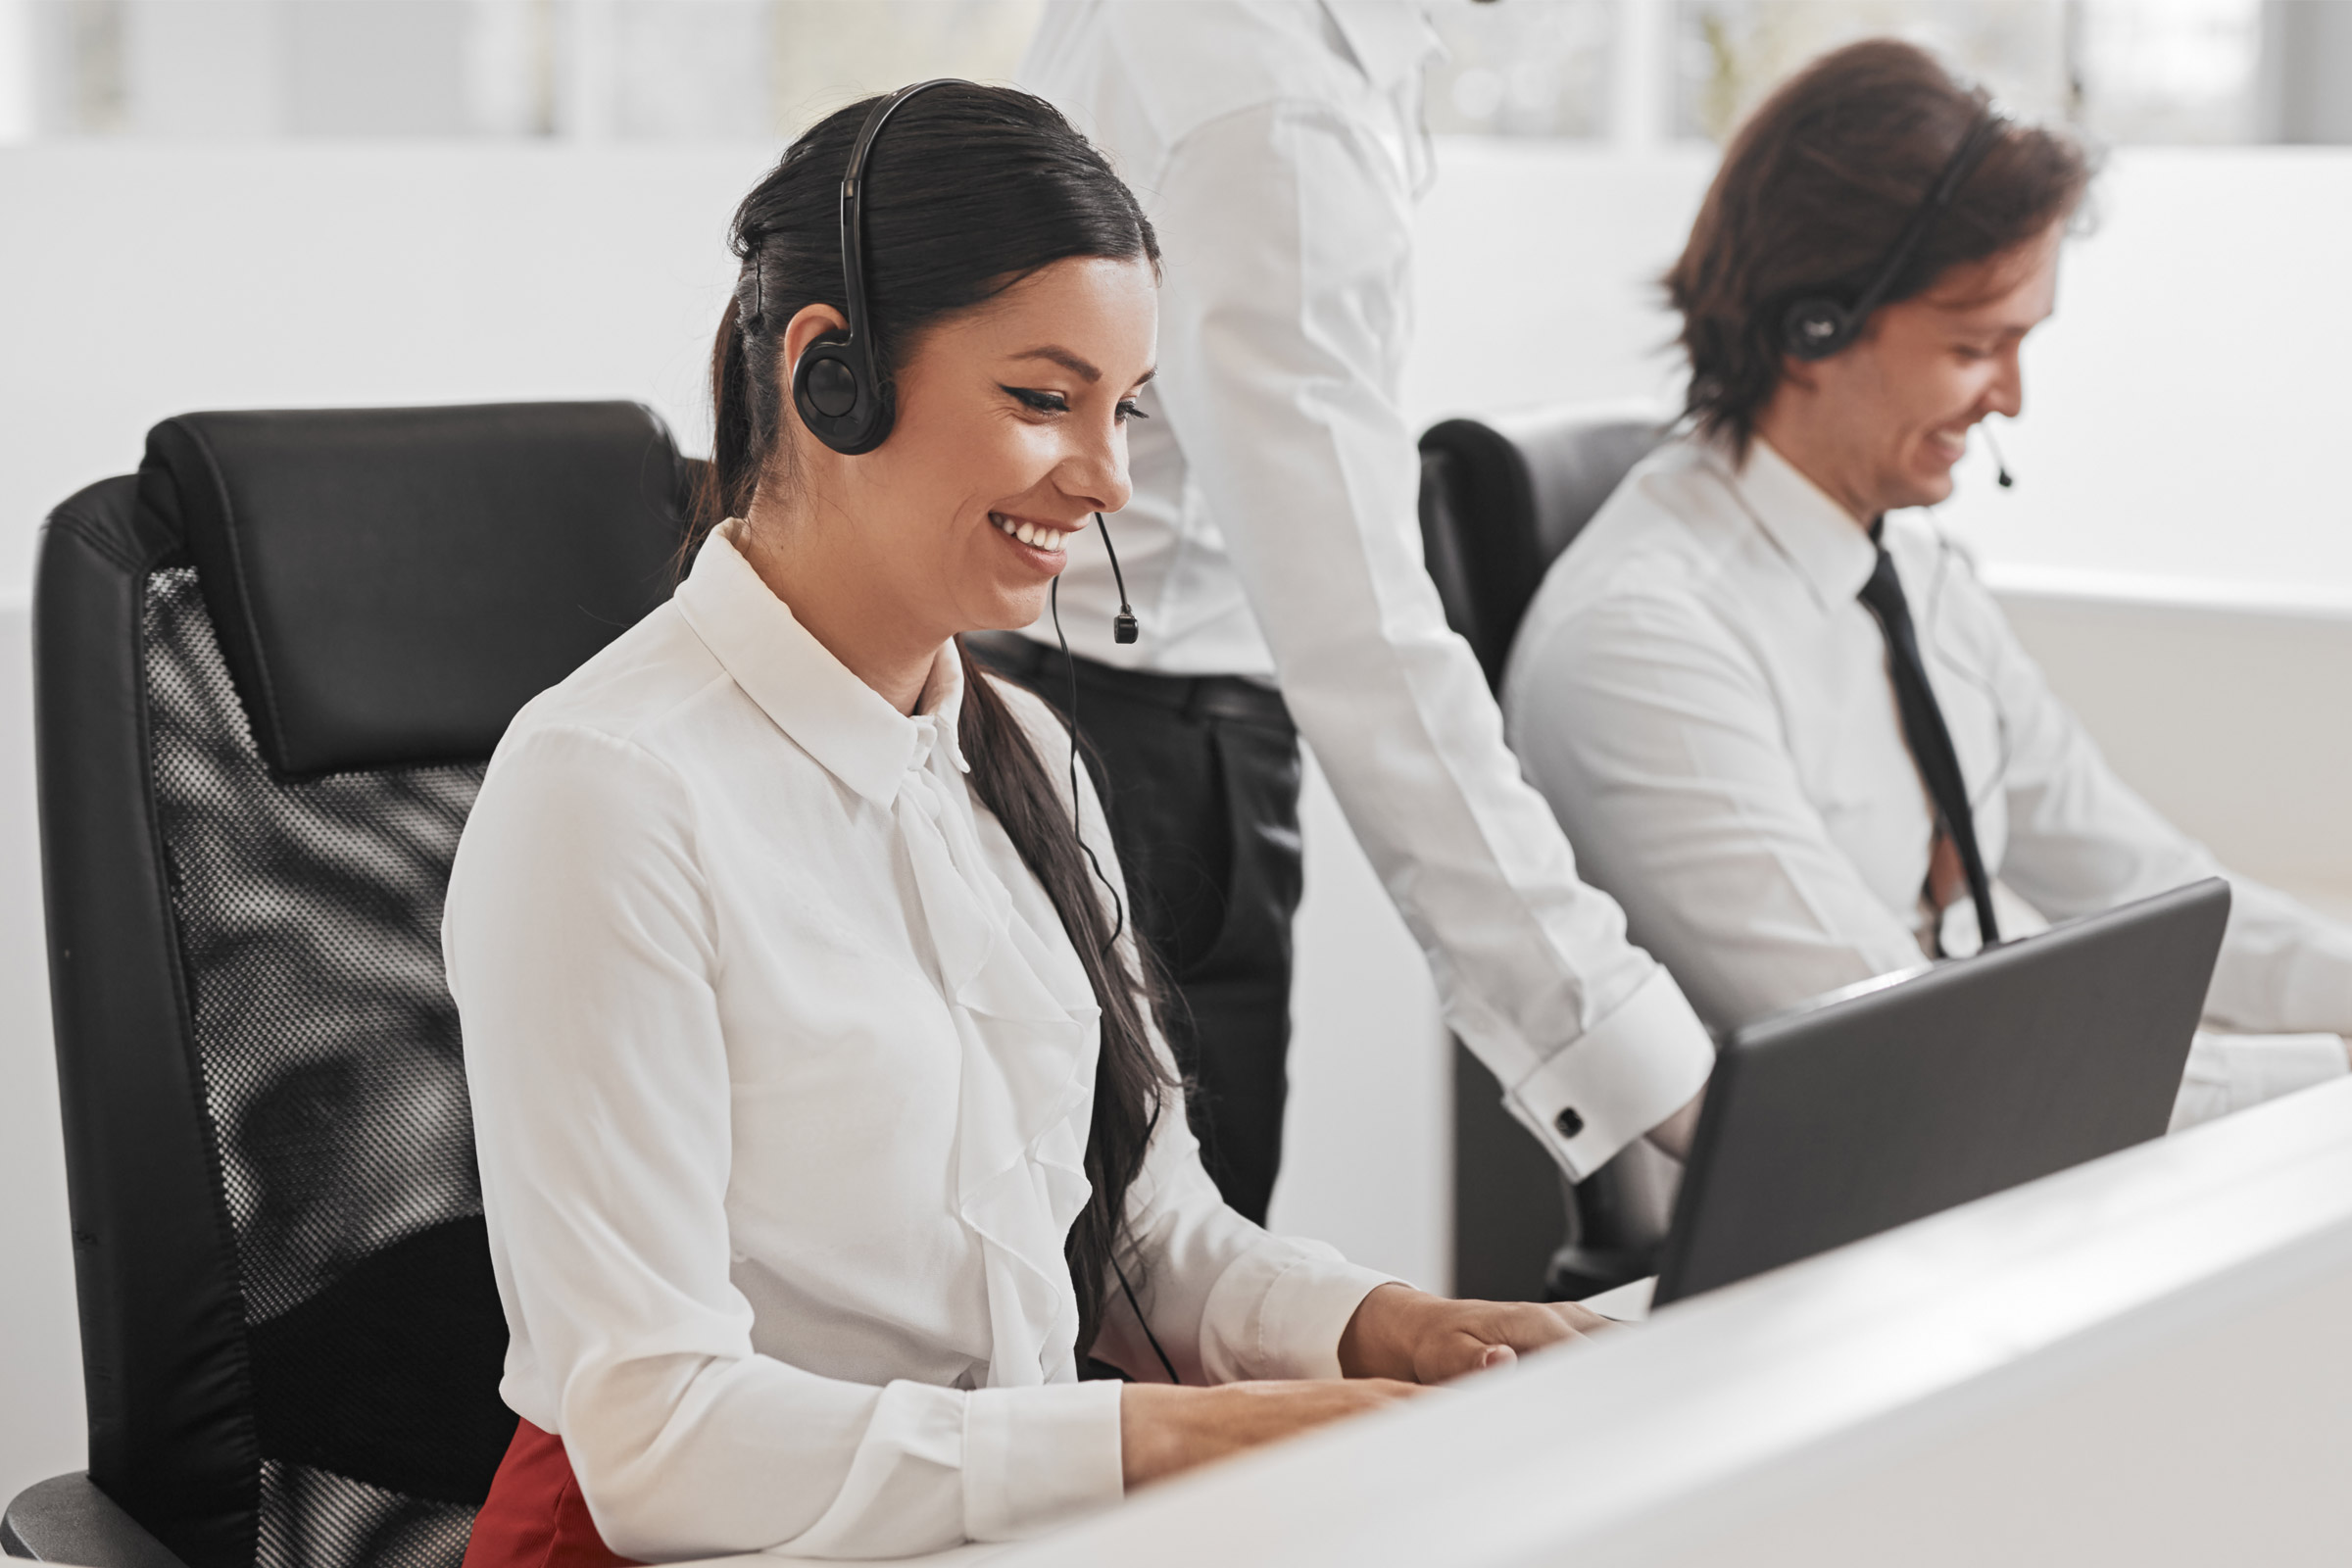 Call center agents assist with a smile